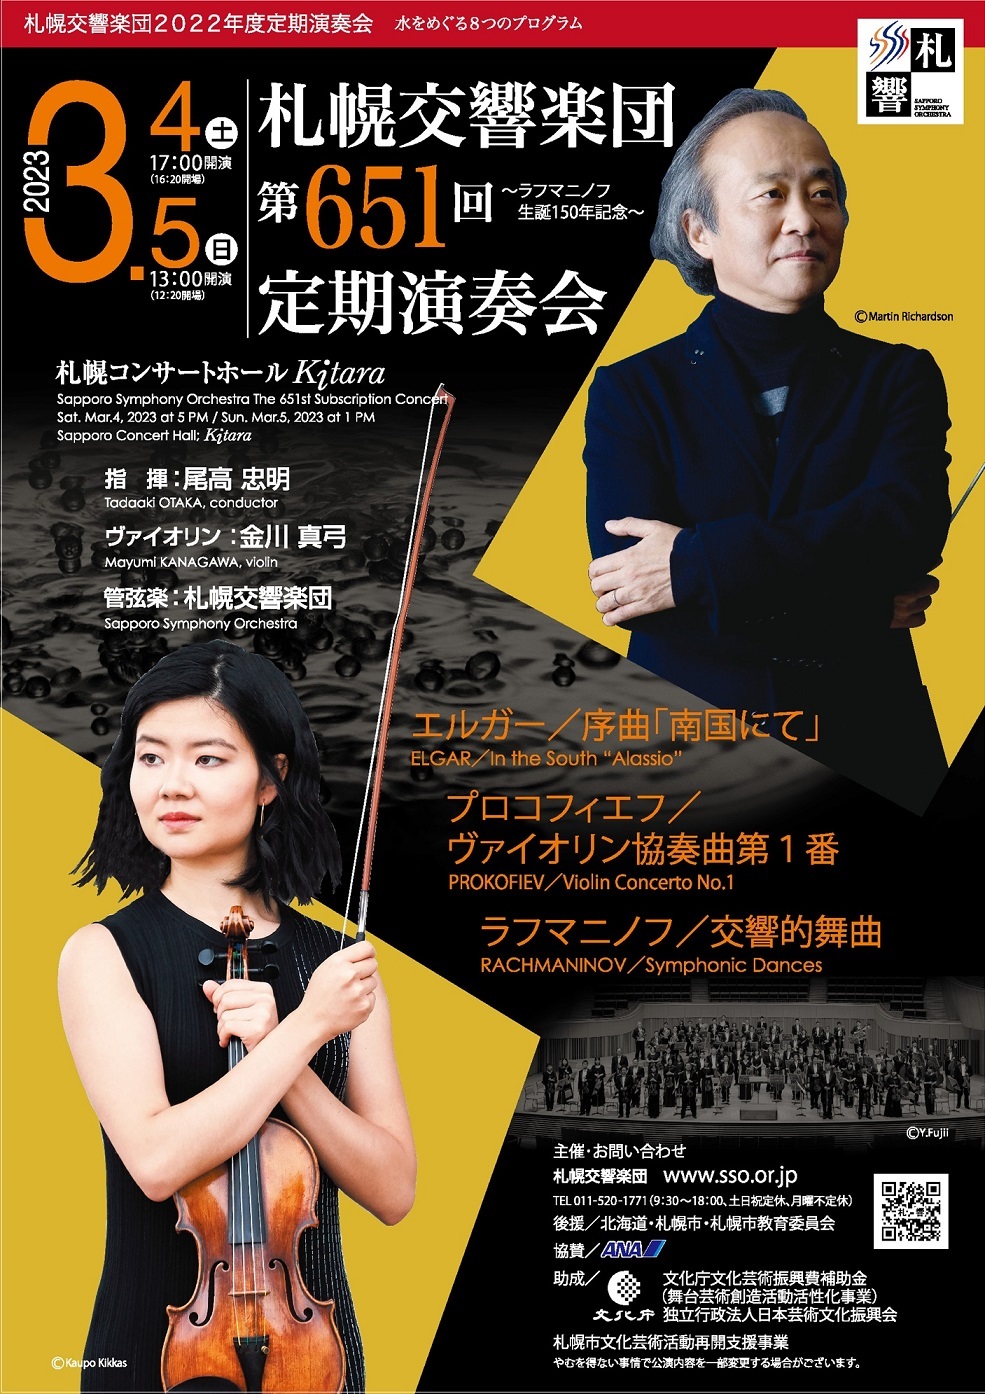 【Ticket Information】 651st Subscription Concert scheduled on March 4 and 5